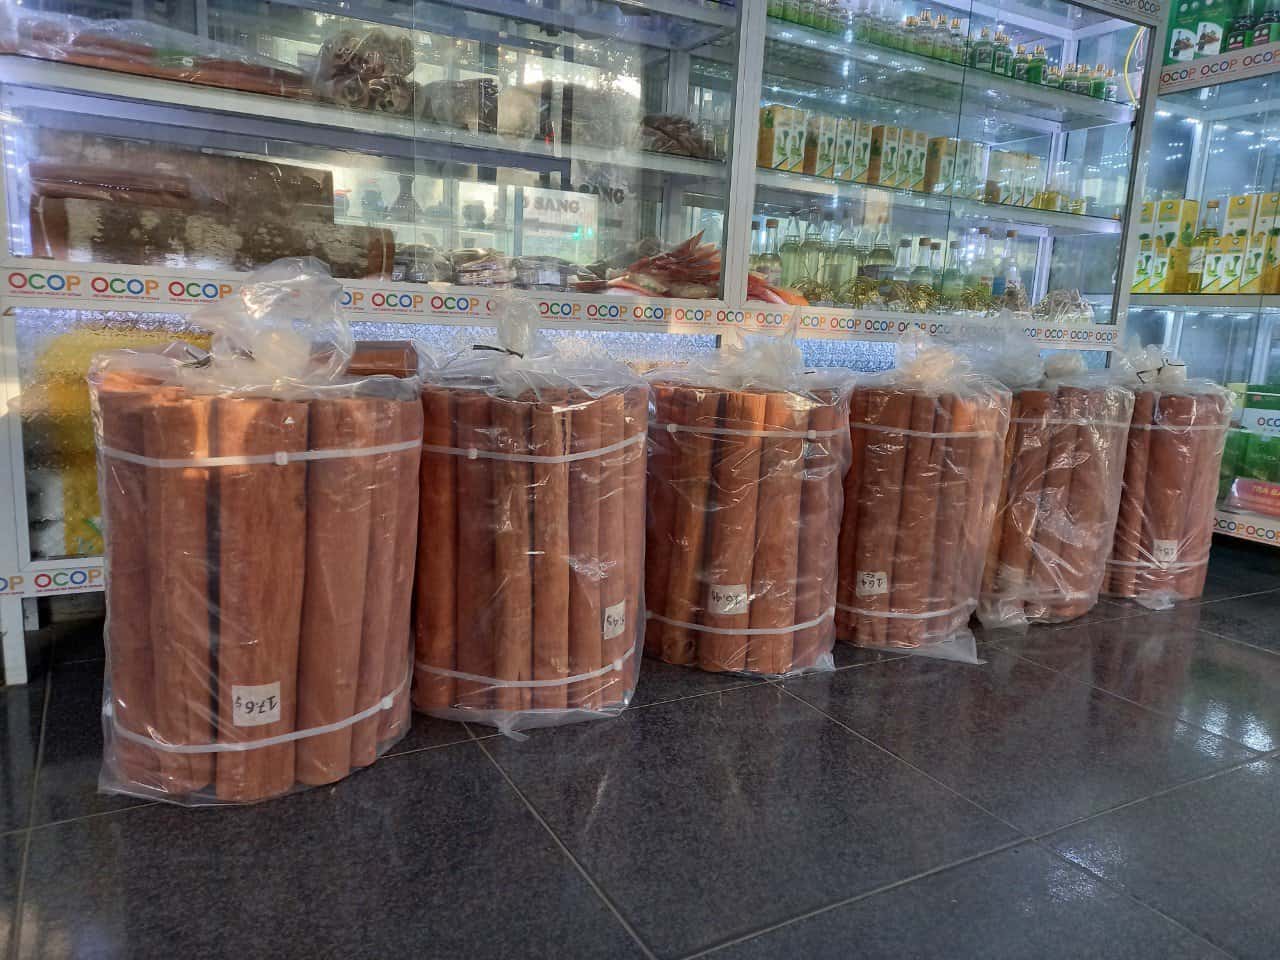 13-must-know-requirements-of-importing-cinnamon-sticks-in-bulk-for-the-us-and-eu-markets-7.jpg